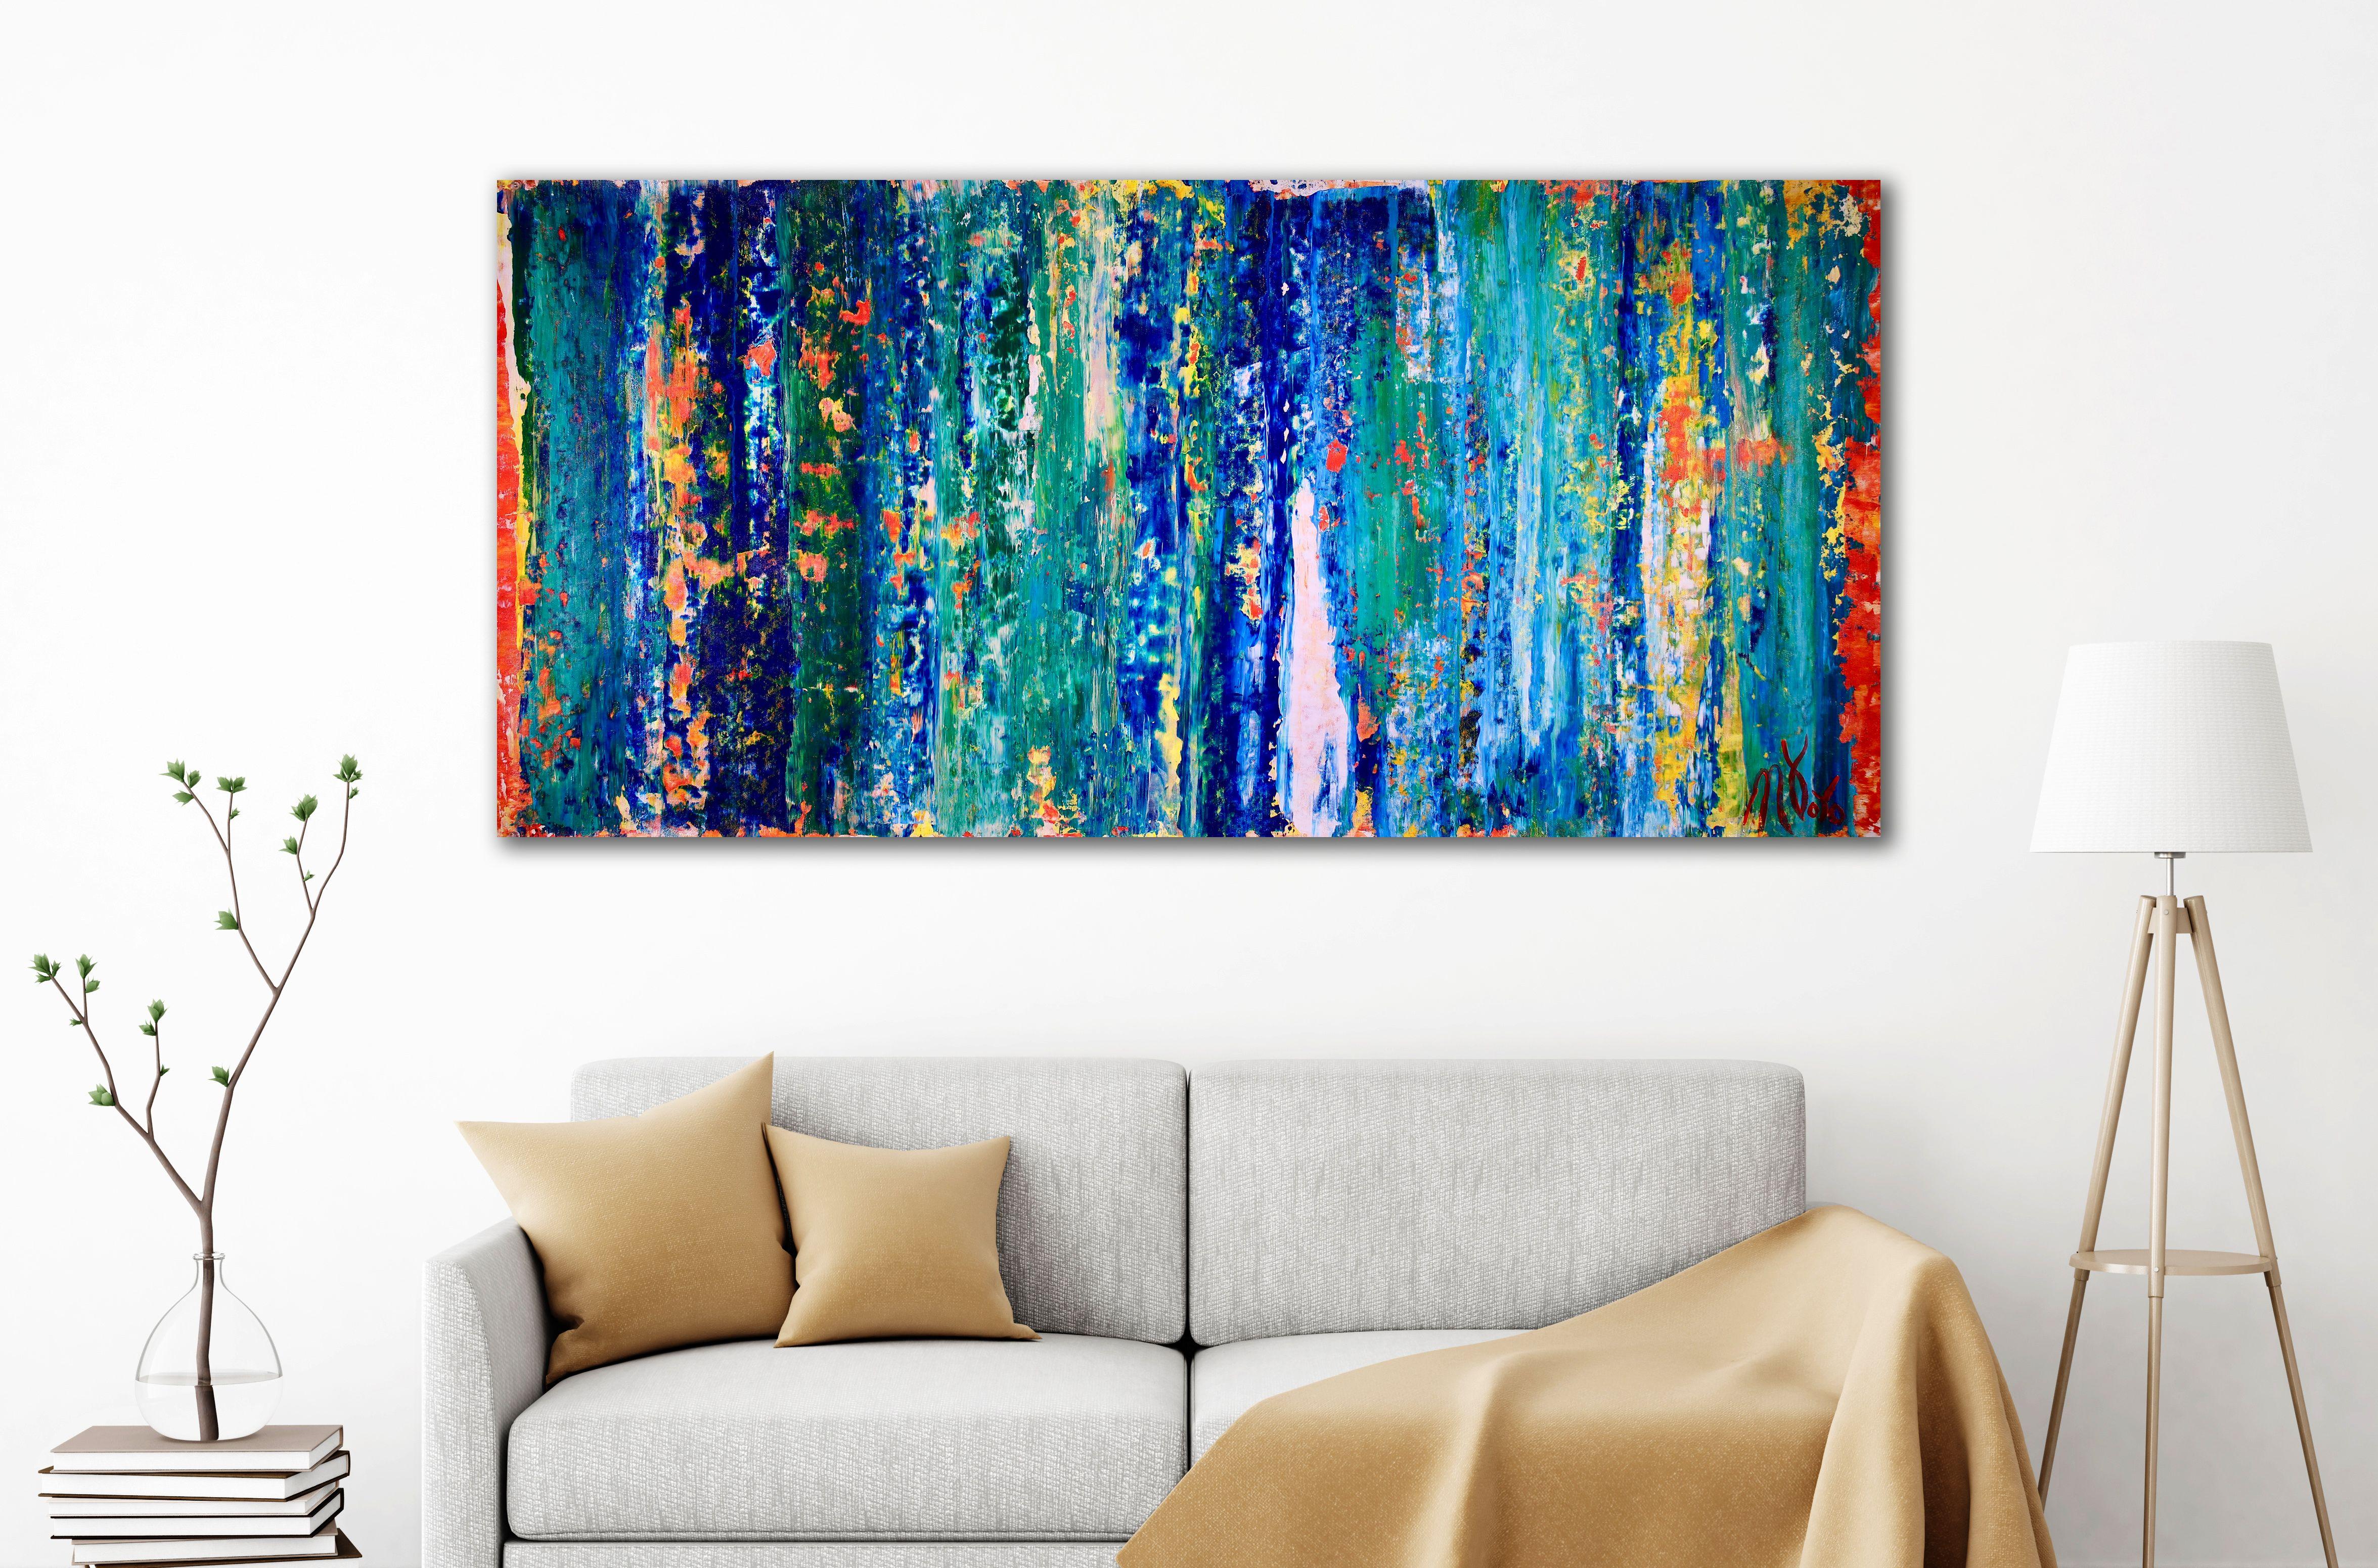 Nature Inspired with lovely shades of blue, green and yellow with orange backdrop.    ORIGINAL FINE ABSTRACTS - ONE OF A KIND!  I only make original works. Each is a one of a kind so you will have the only one! My artwork is my passion and you can